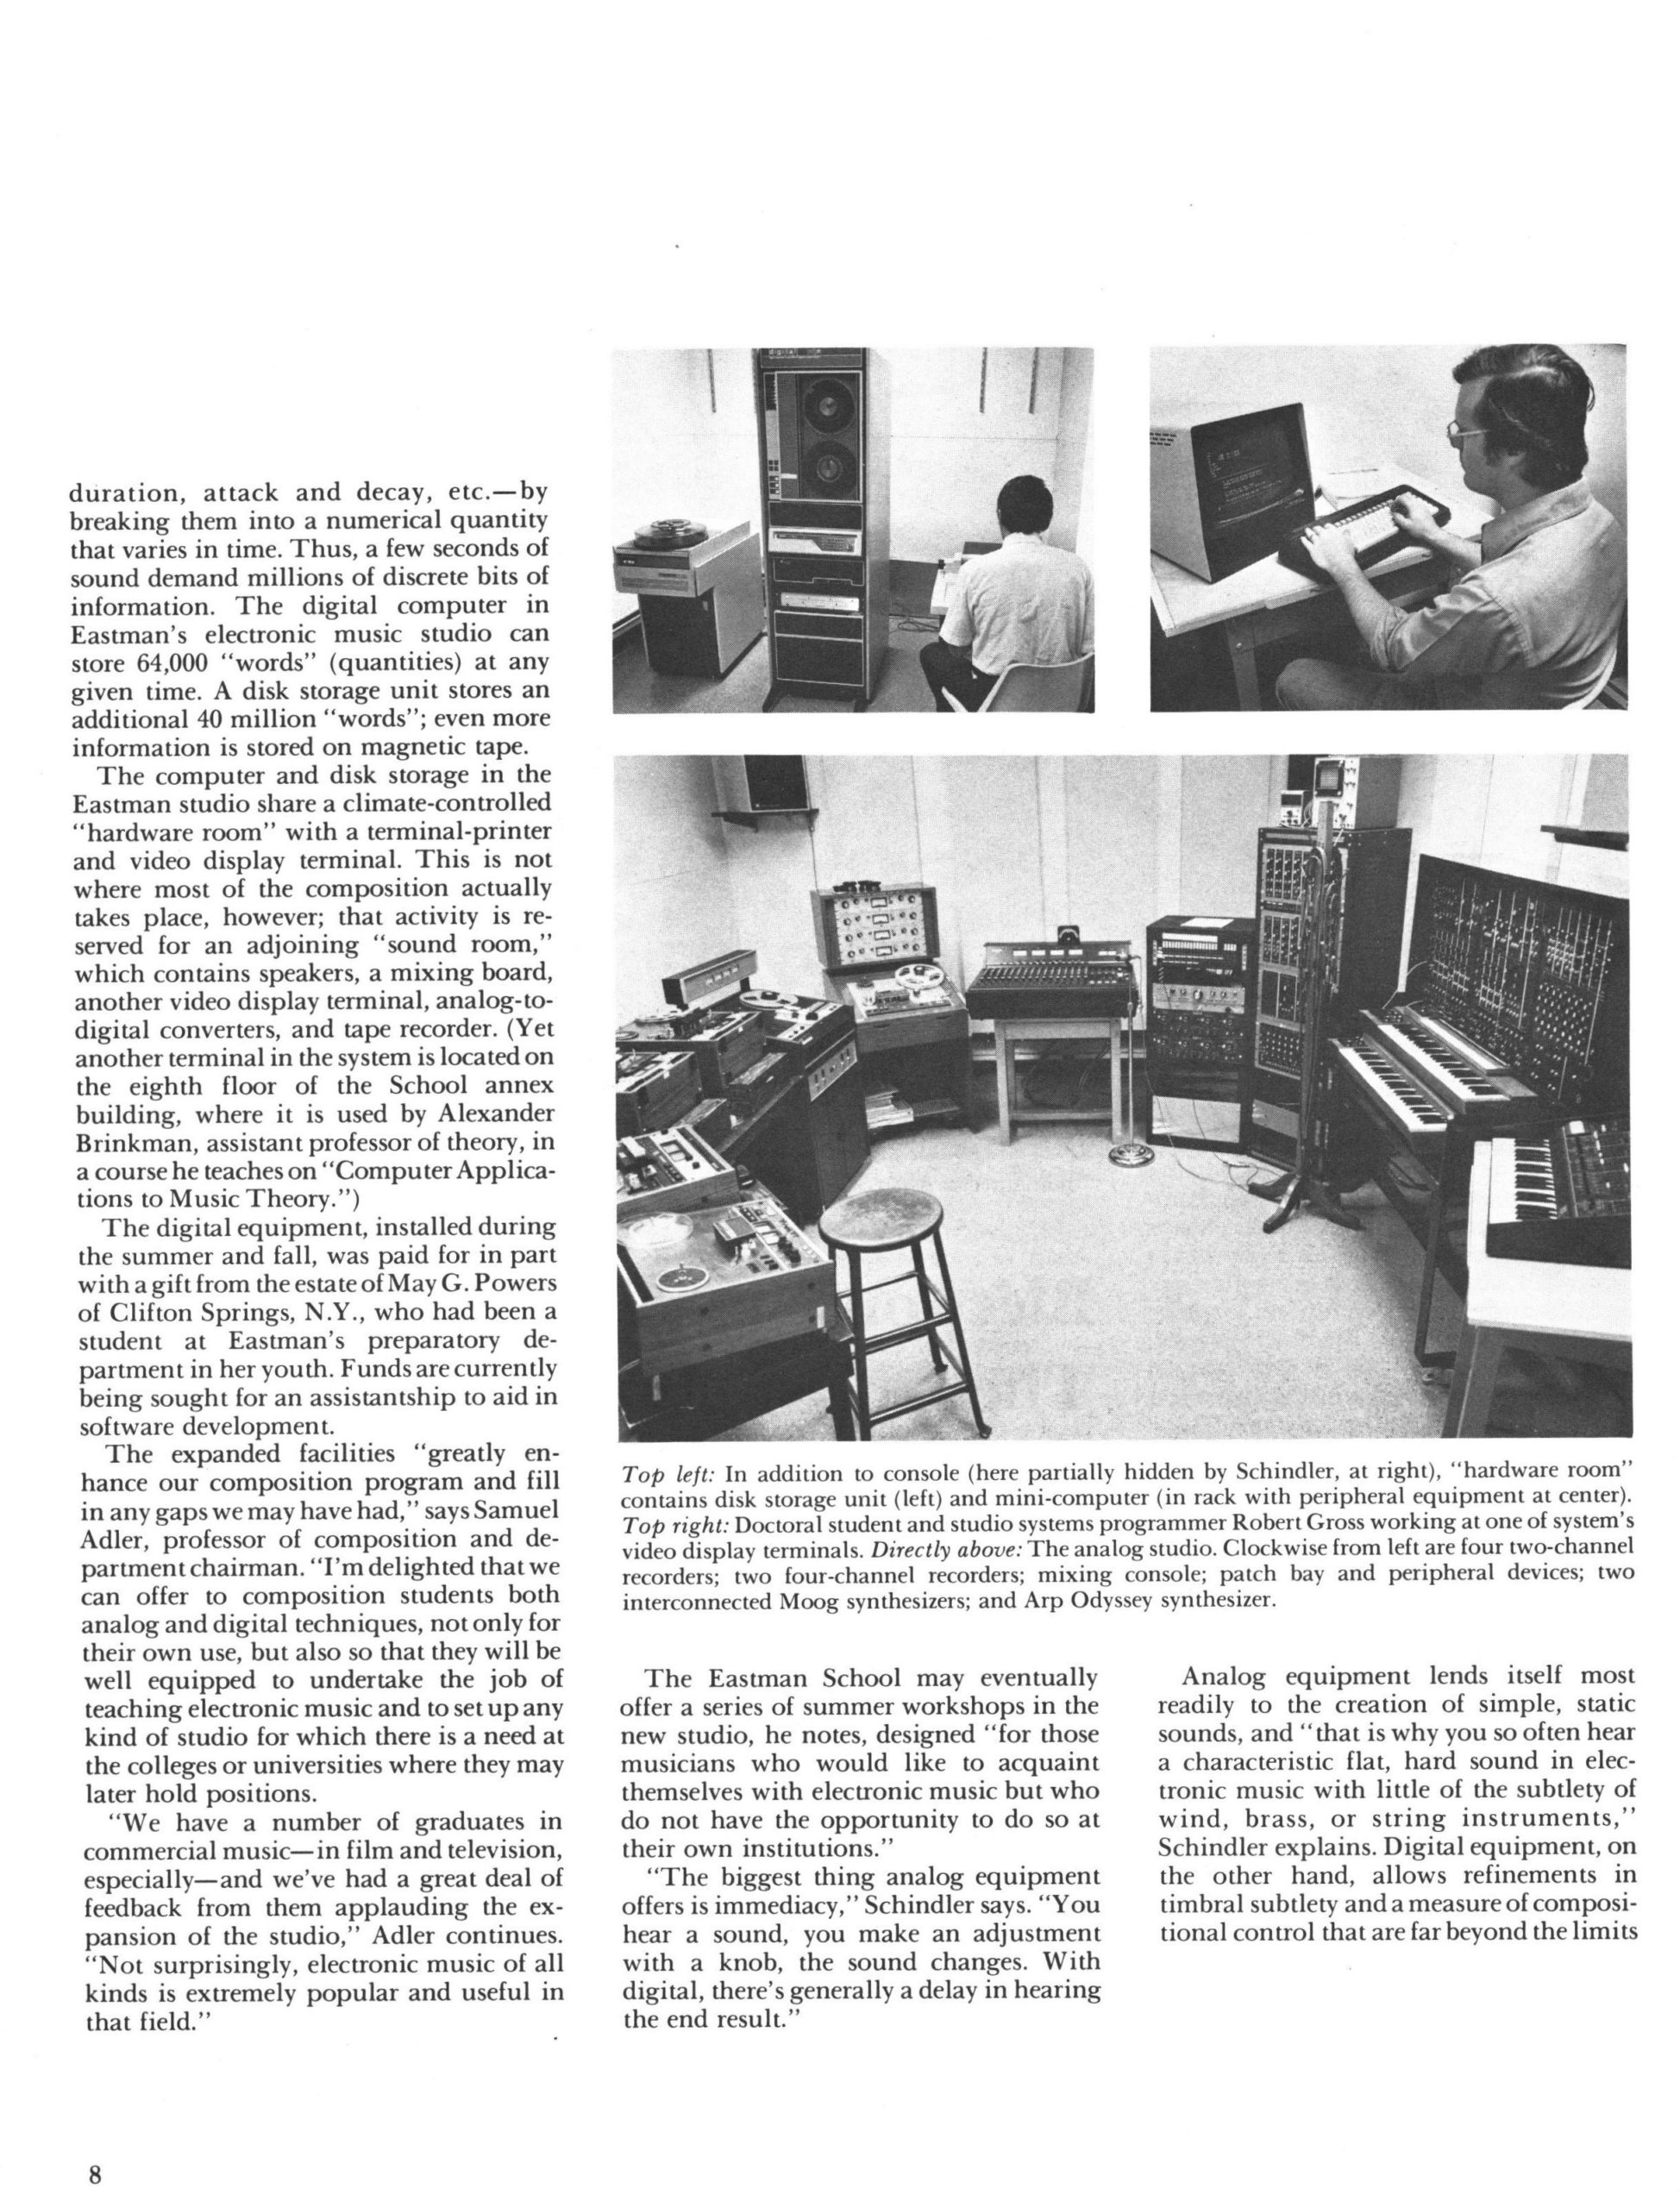 Electronic music at Eastman, The new studio article, page 2